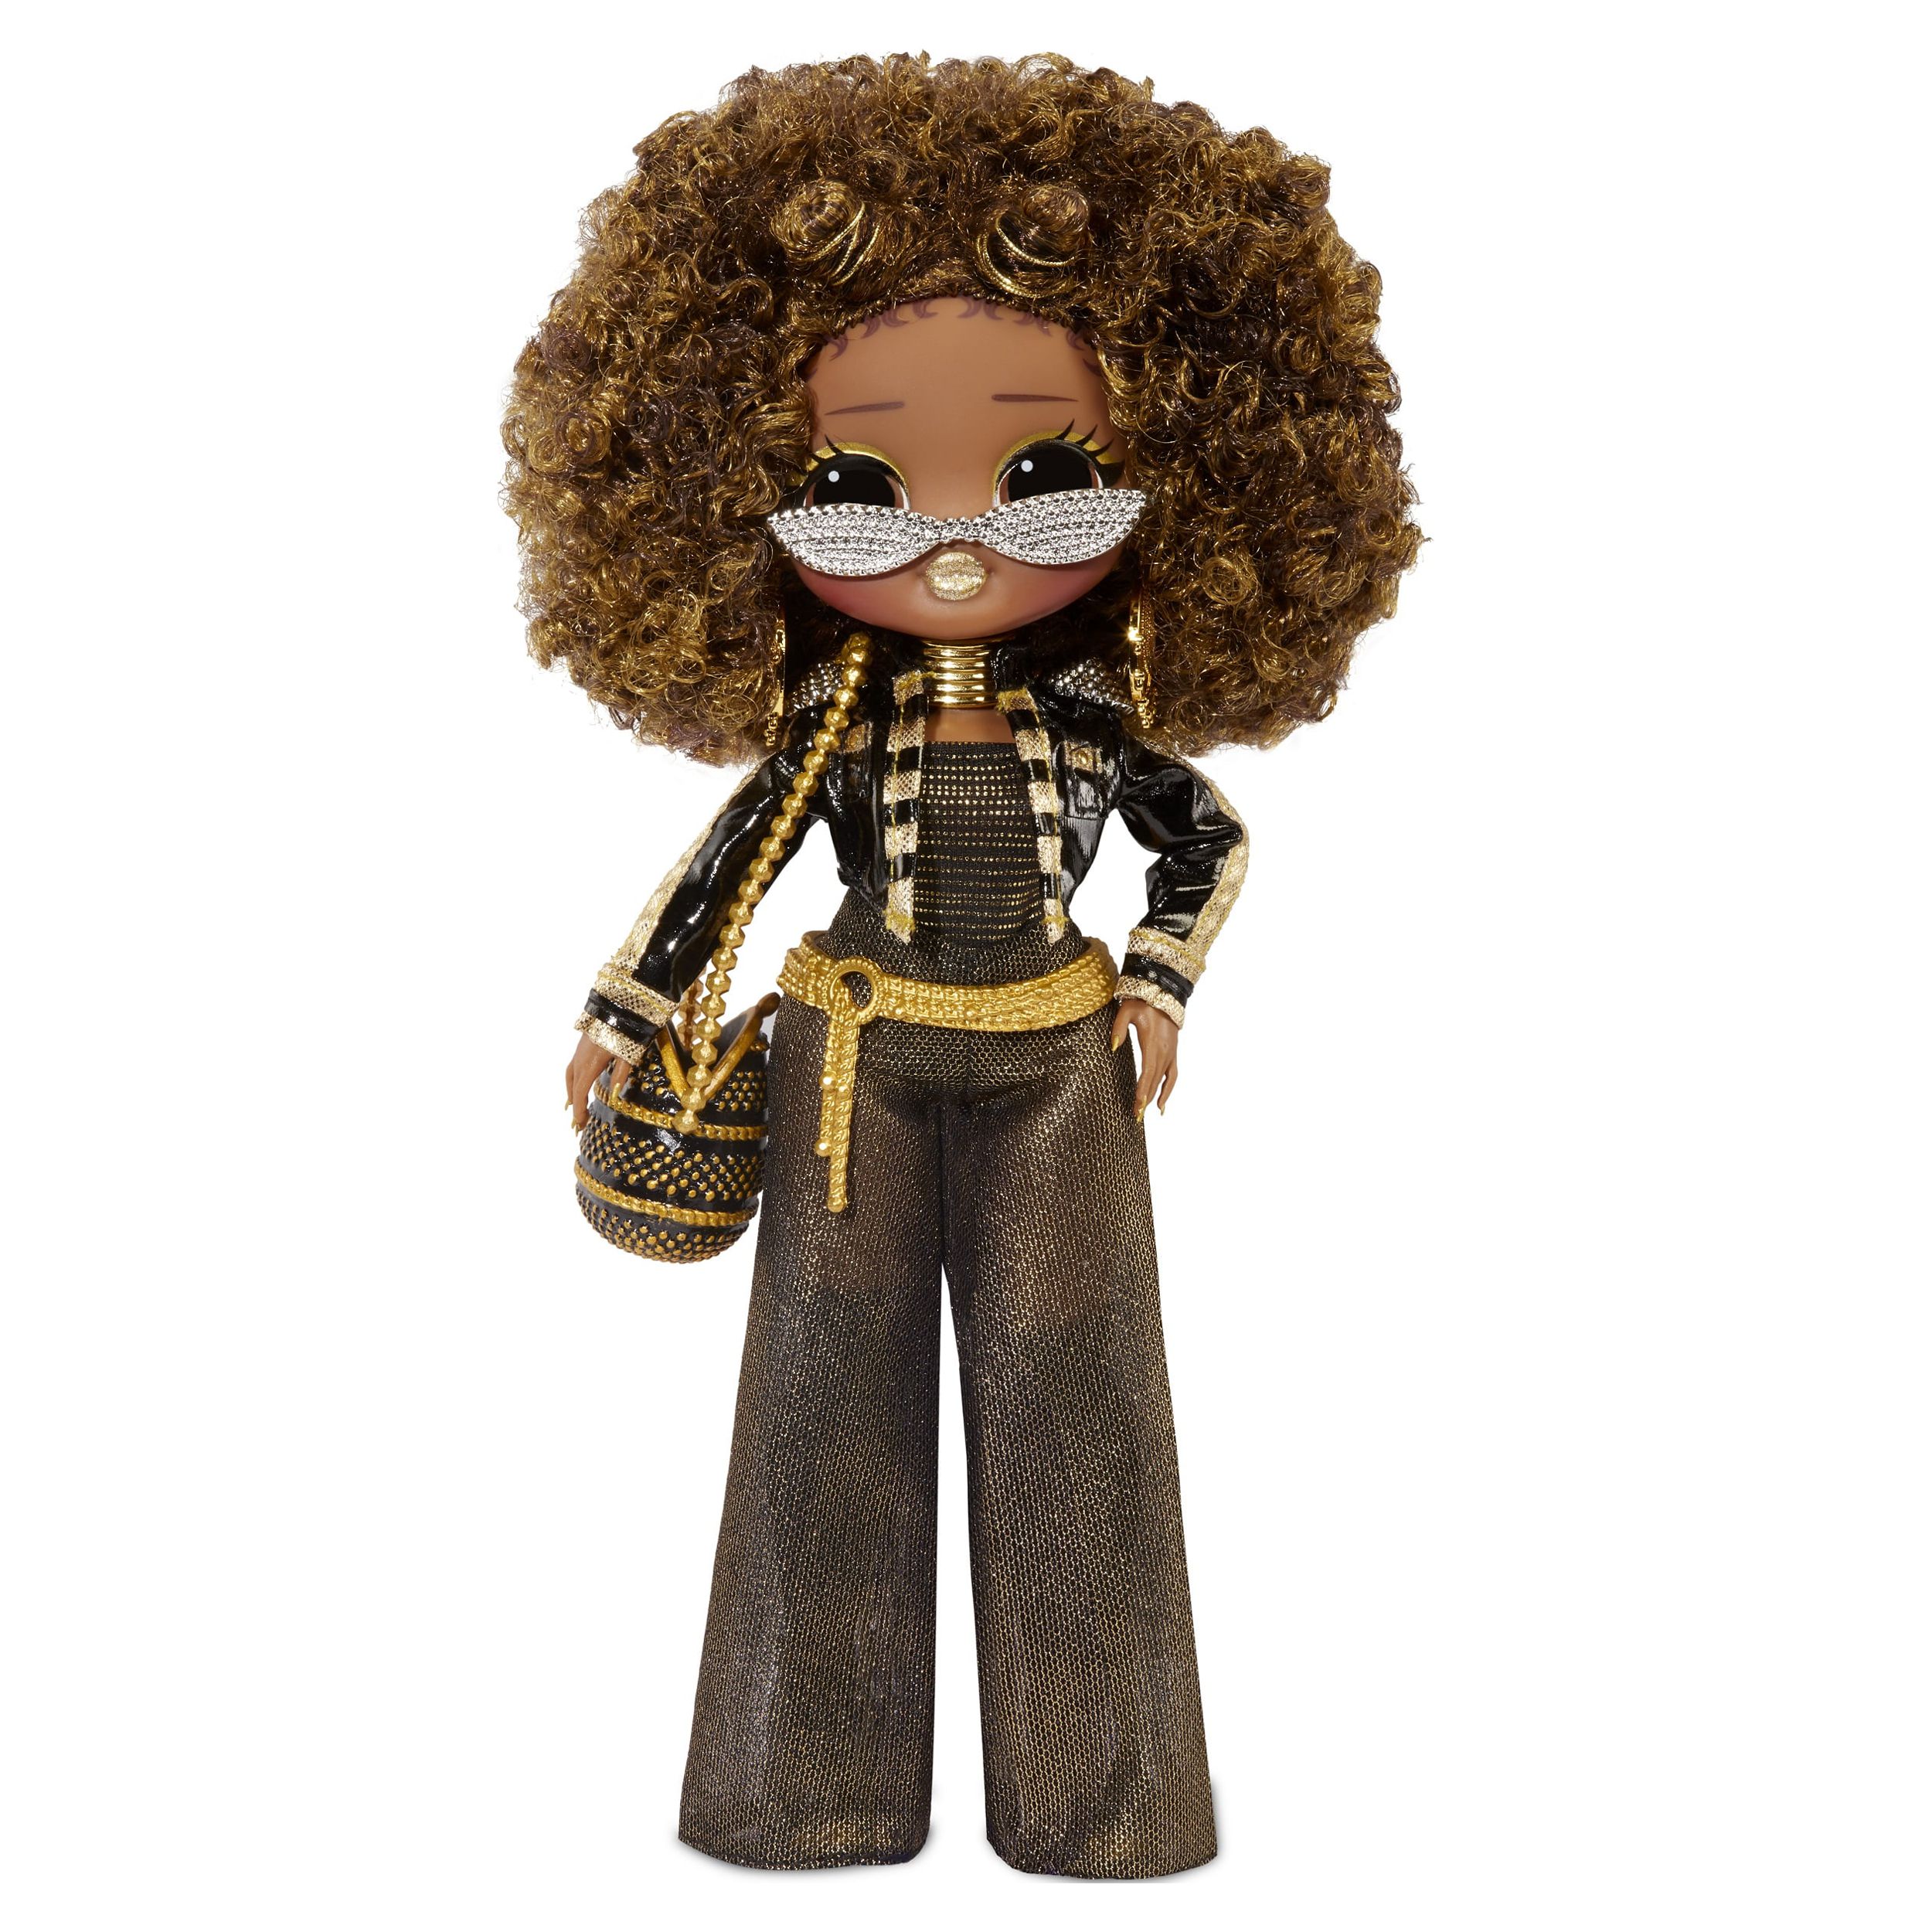 LOL Surprise OMG Royal Bee Fashion Doll With 20 Surprises, Great Gift for Kids Ages 4 5 6+ - image 1 of 3